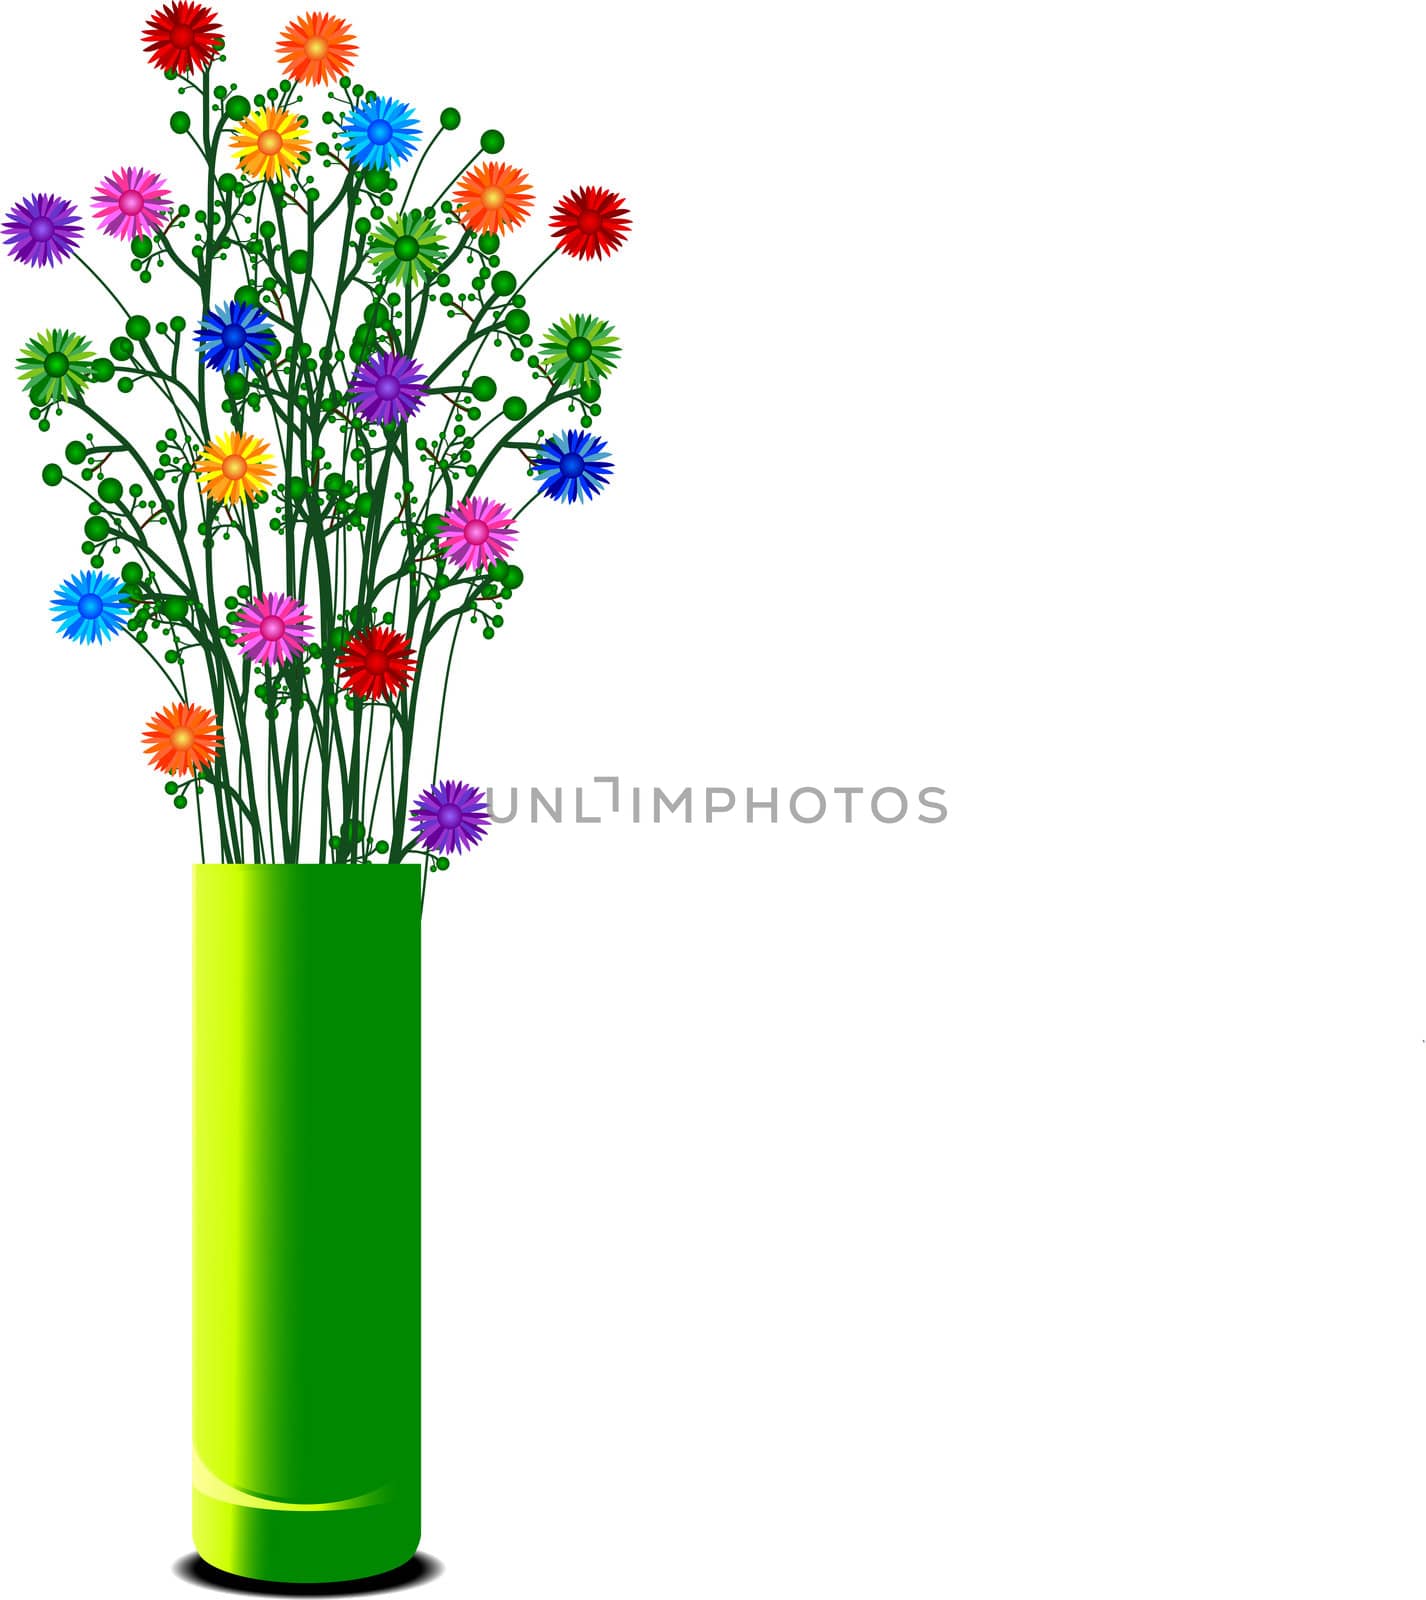 vase with colorful flowers by peromarketing